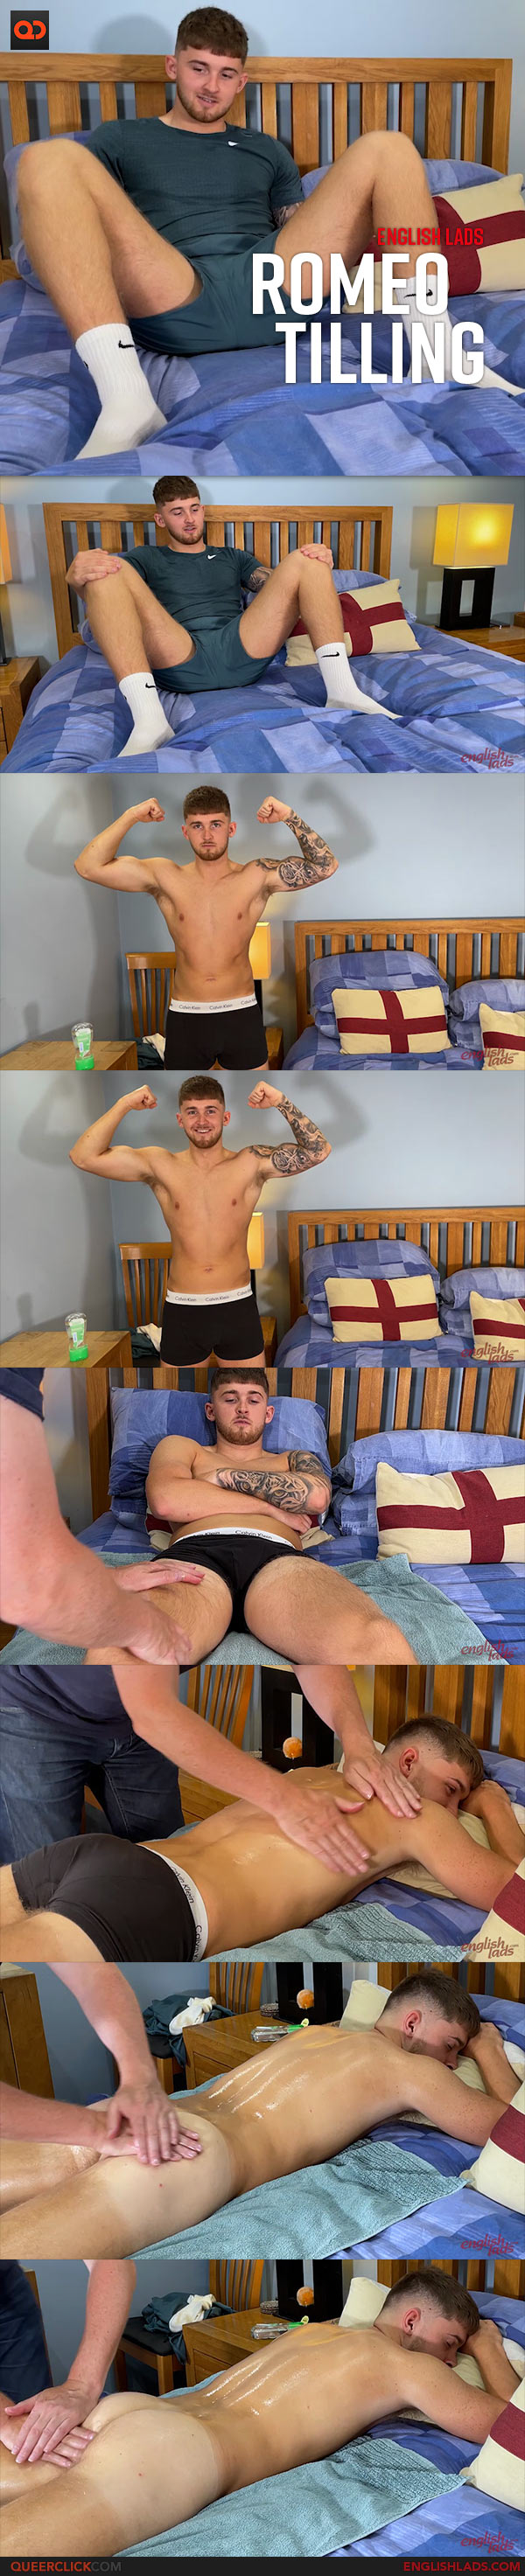 English Lads: Romeo Tilling - Young Straight Footballer Stud Gets His First Manhandling